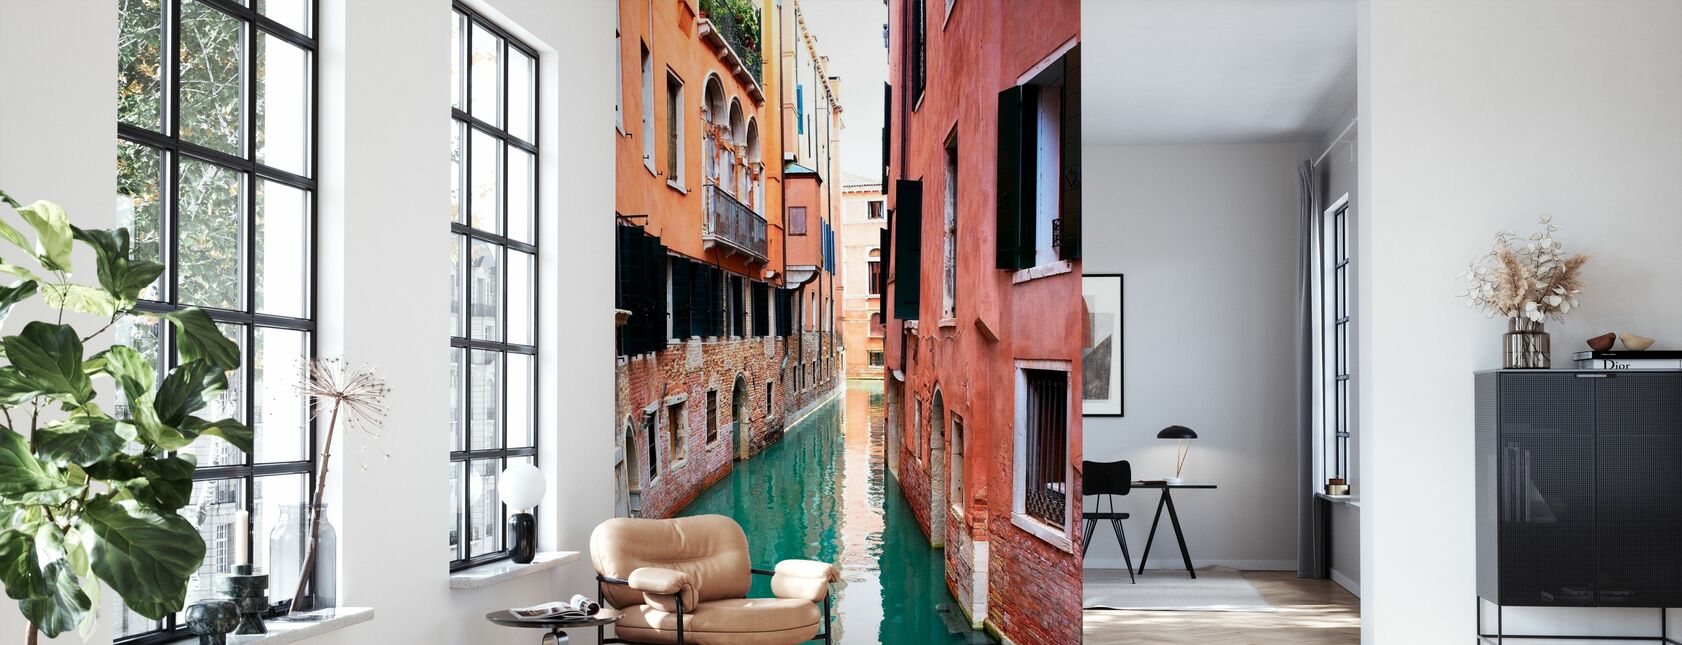 Tranquility in Venice - Wallpaper - Living Room